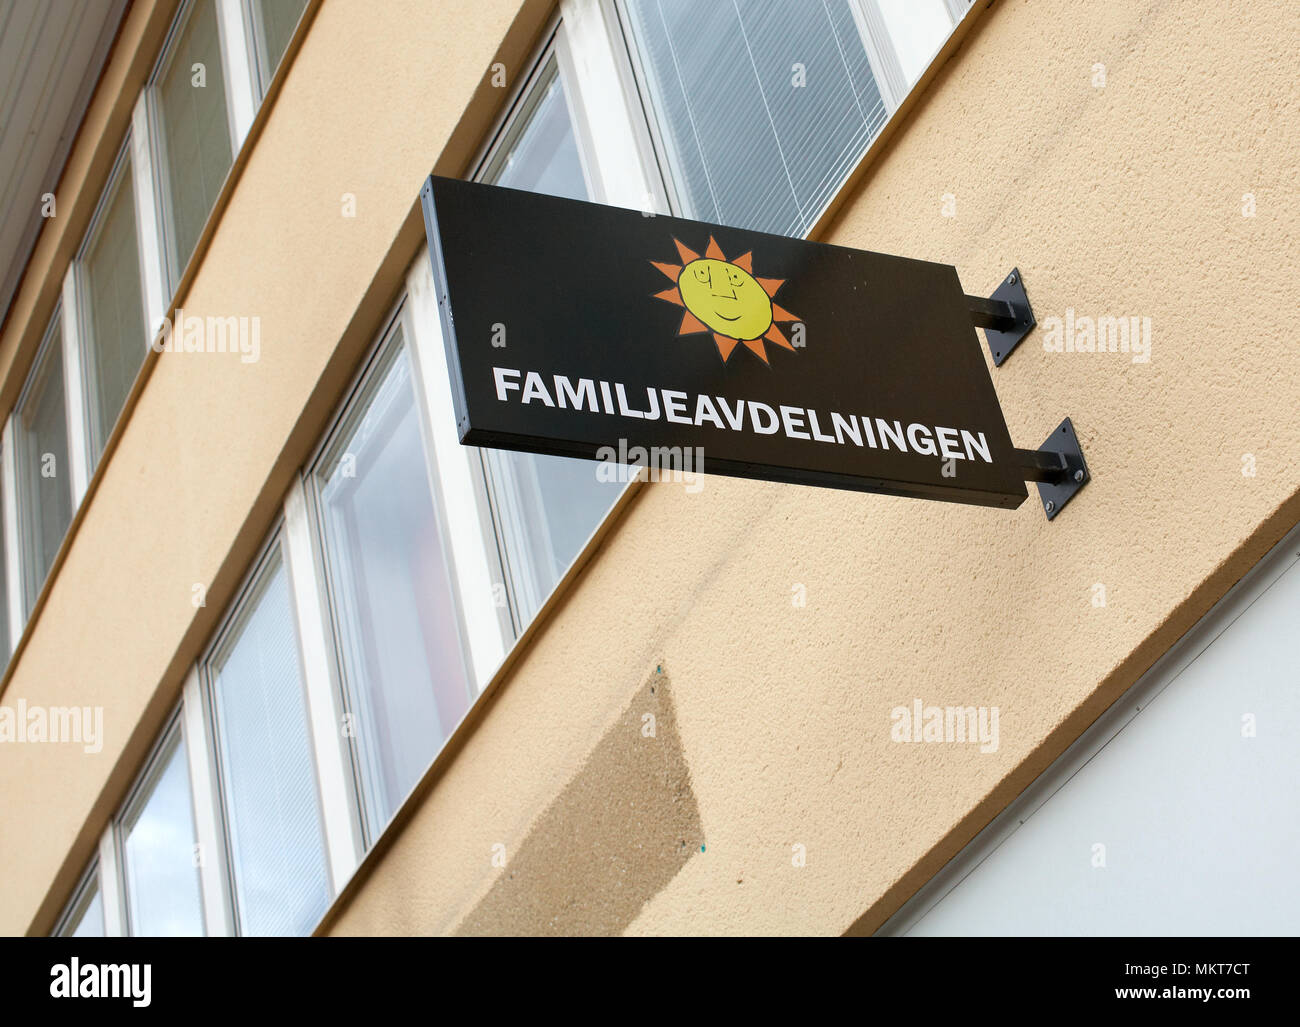 September 7, 2012: Karlstad, Sweden: Karlstad municipality, Family Division, signage and office building. Stock Photo